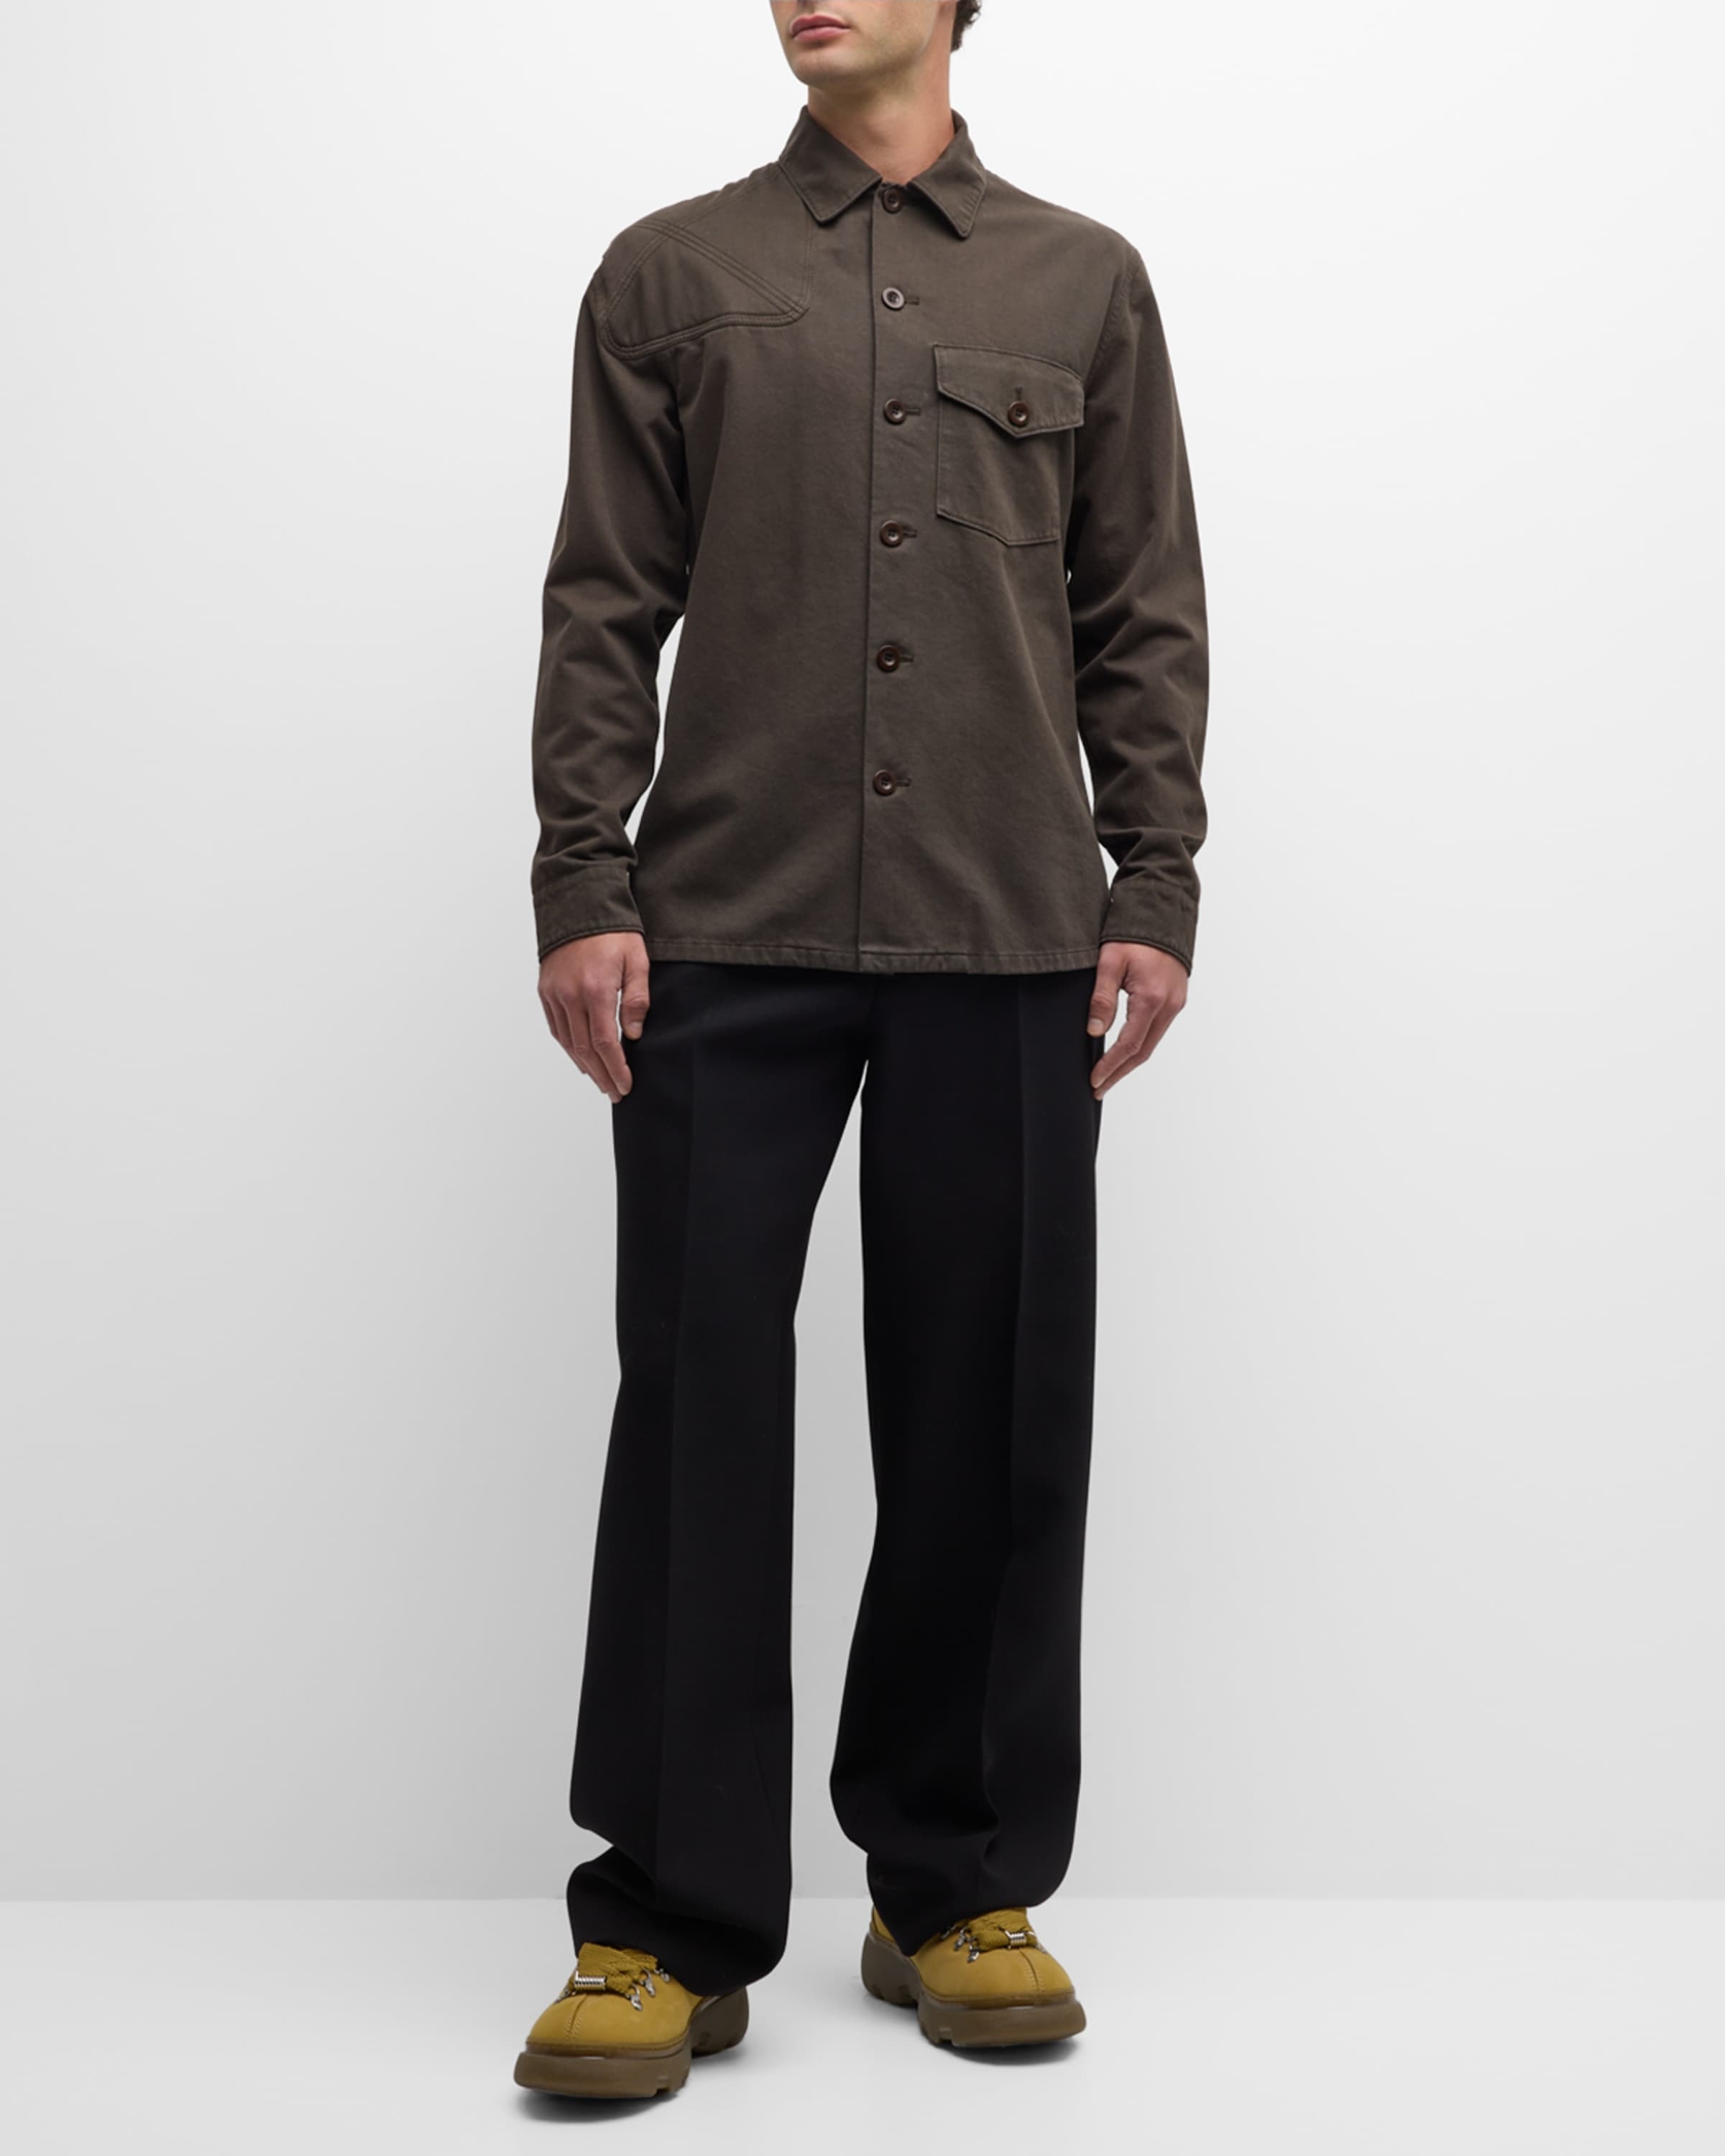 Men's Twill Shirt with Embroidered Patches - 5